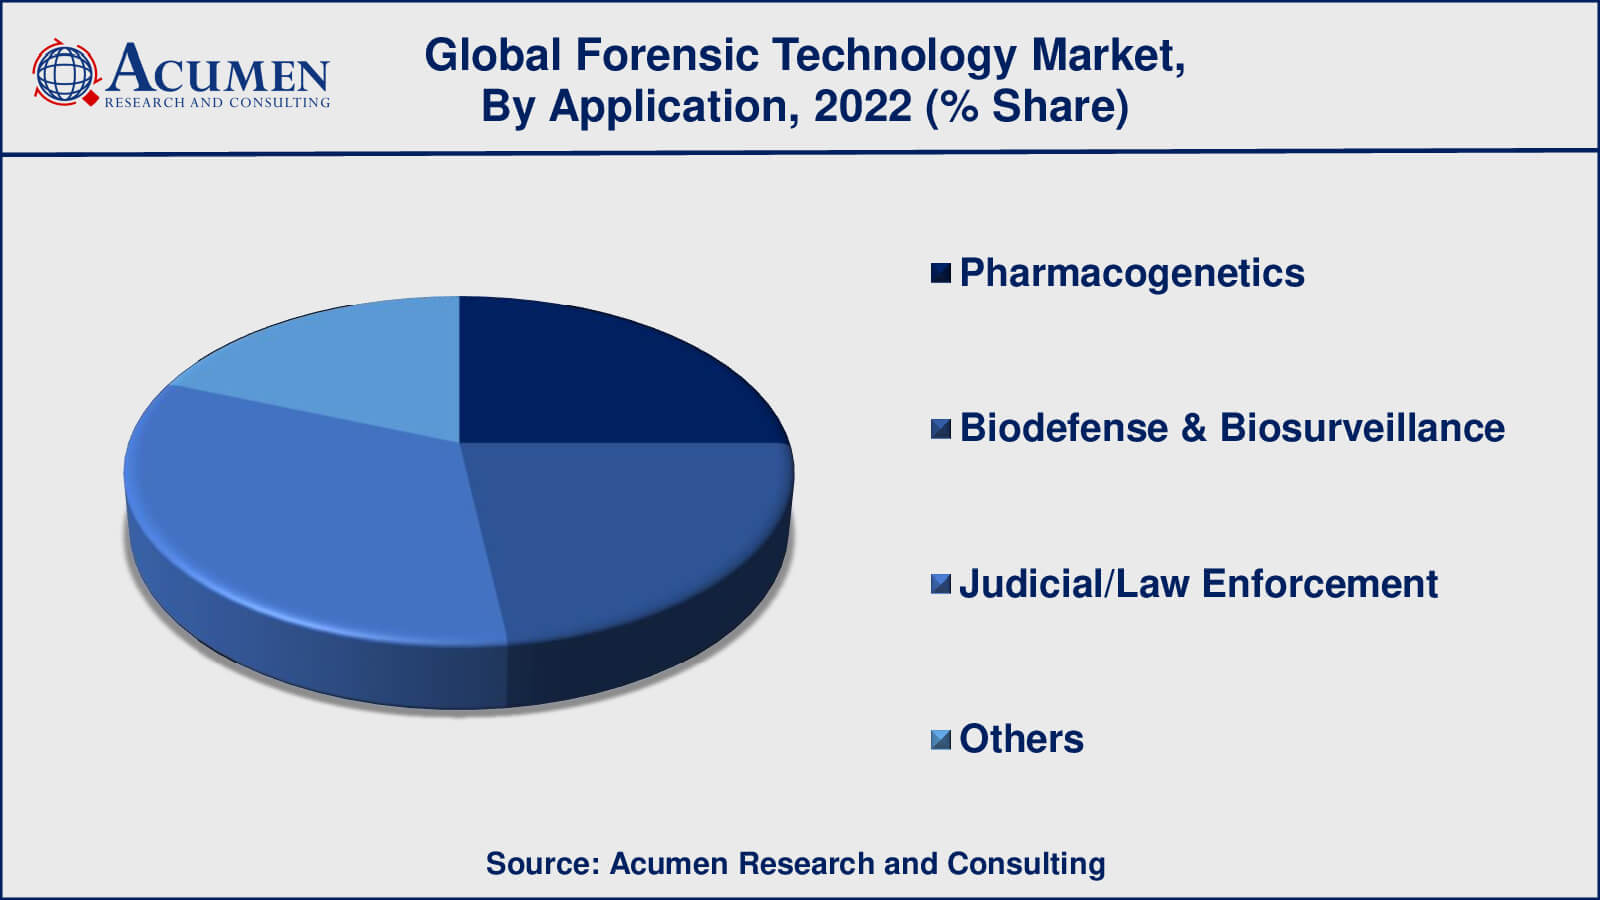 Forensic Technologies Market Drivers